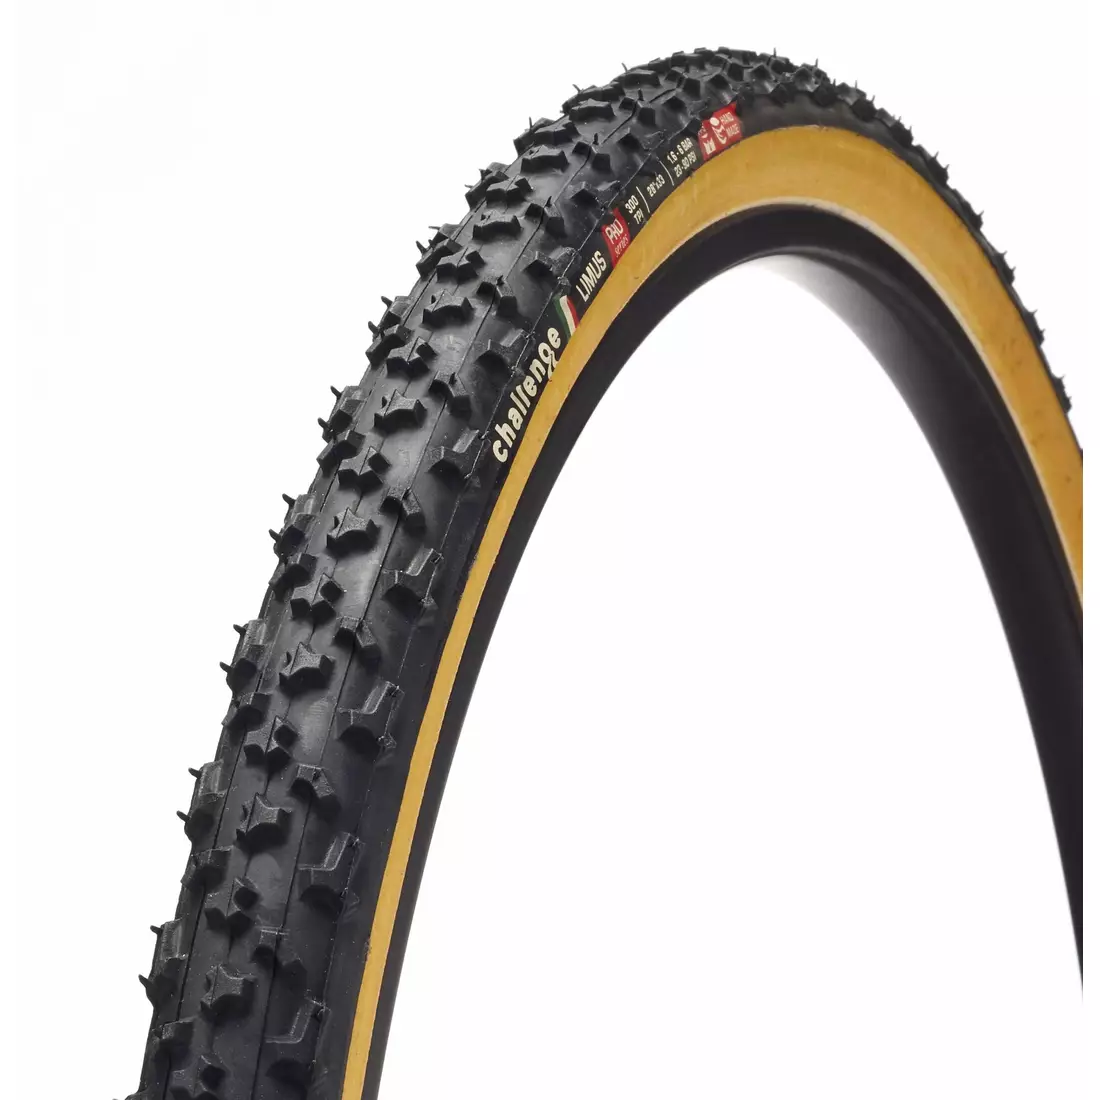 CHALLENGE BABY LIMUS OPEN TUBULARS cross-country tire (700x33c) 300TPI, black and cream